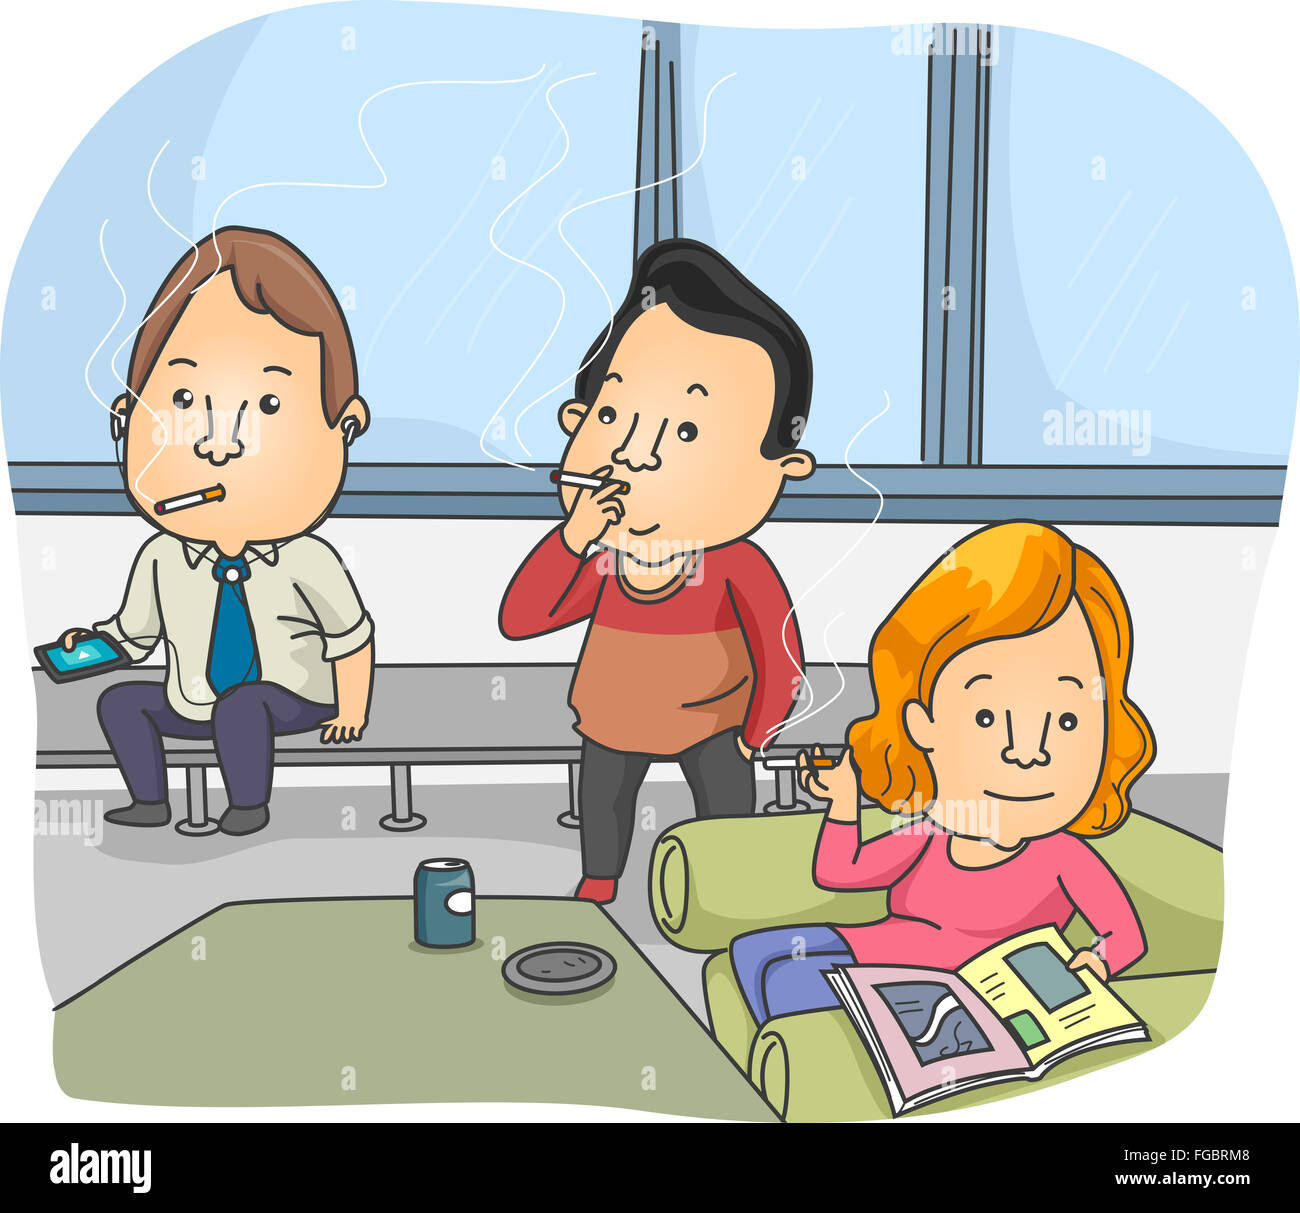 Illustration of Smokers Taking a Break in the Smoking Room Stock Photo